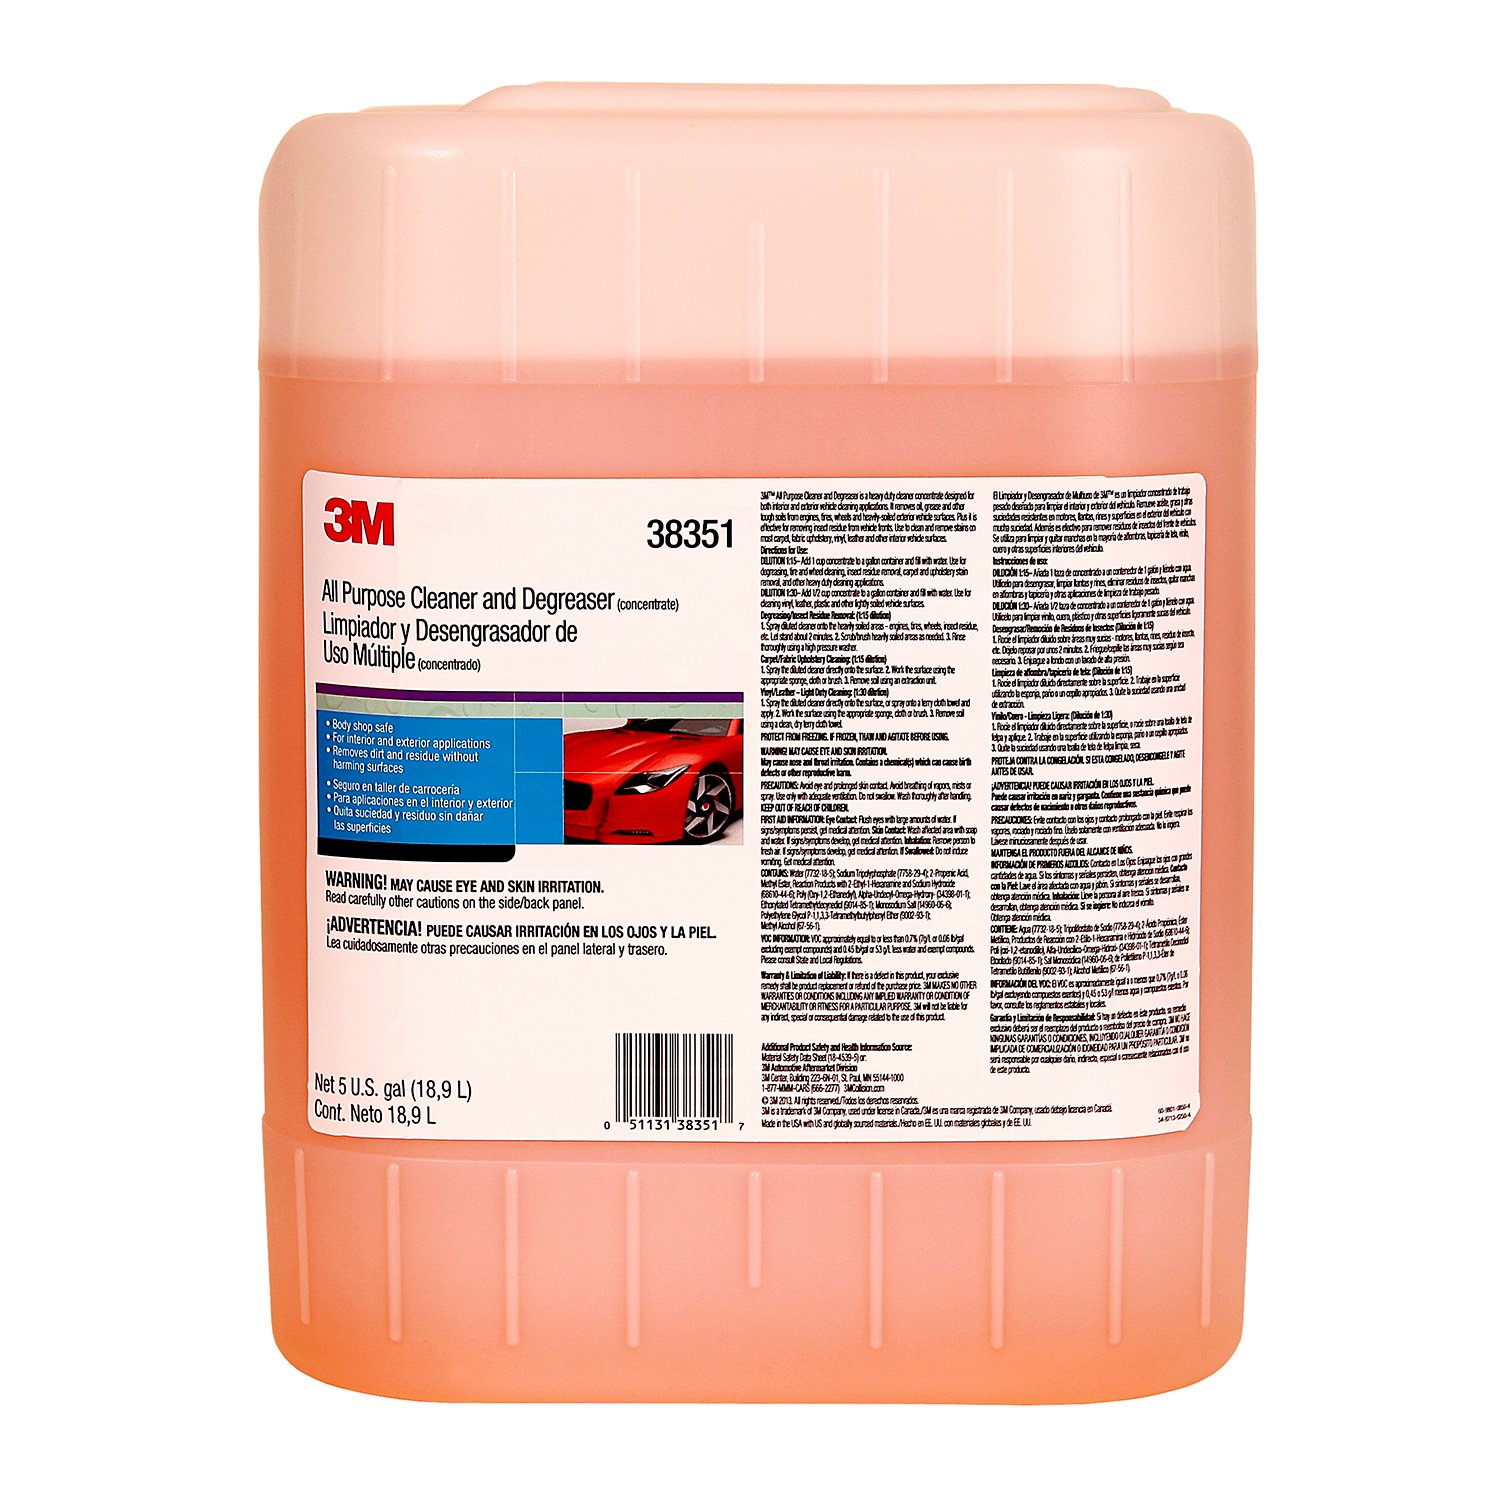 7000045774 - 3M All Purpose Cleaner and Degreaser, 38351, 5 gal, 1 per case